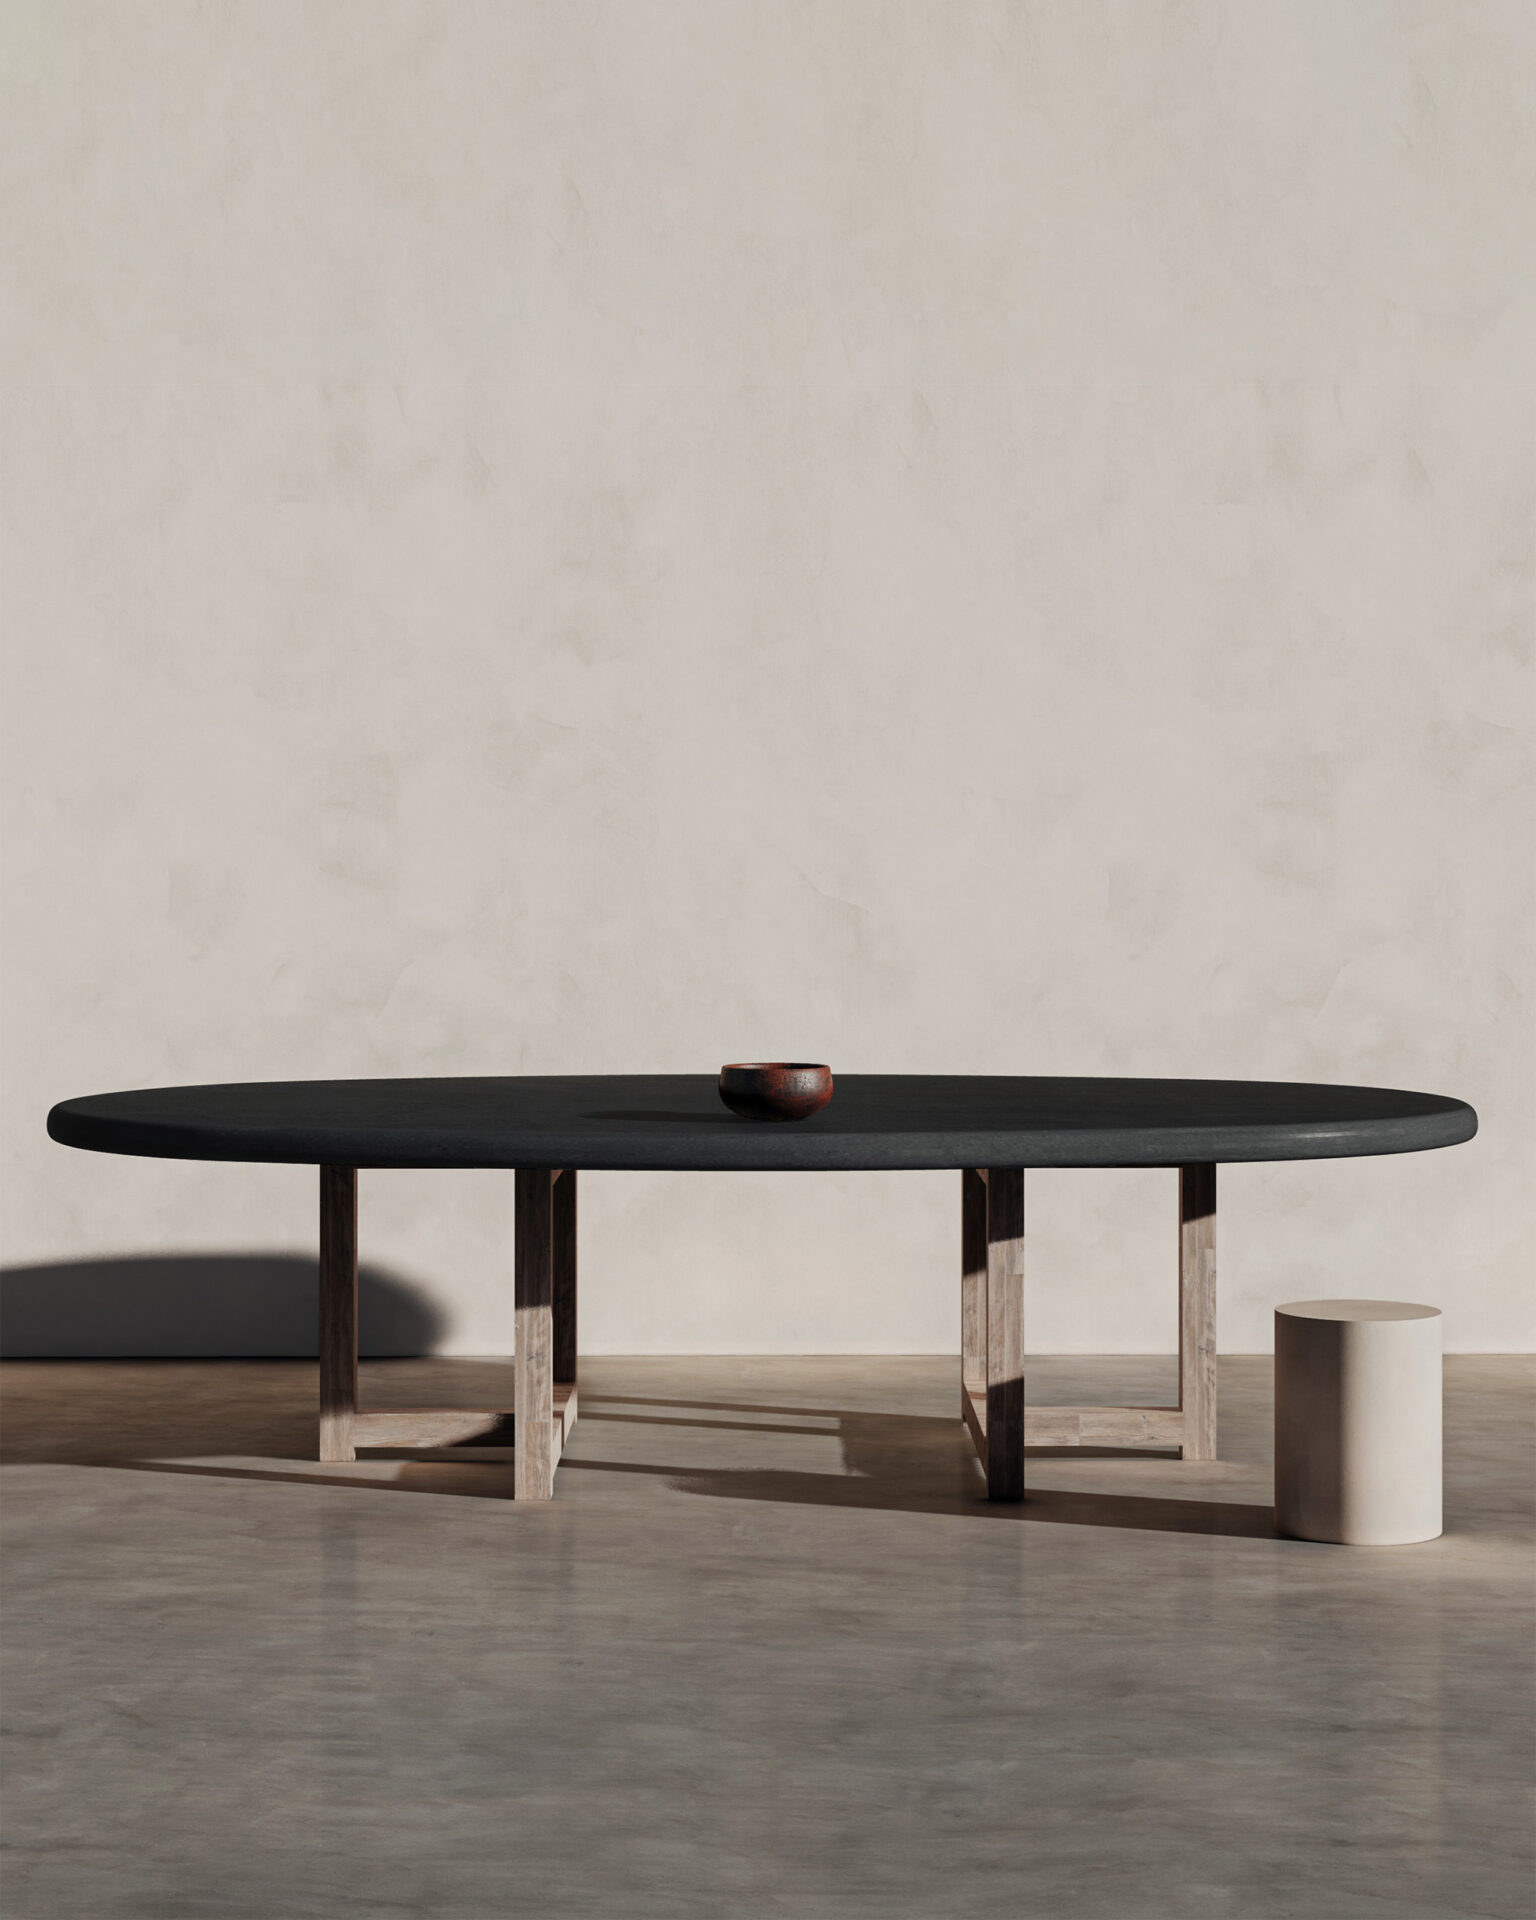 Studio Straf_Oval Dining Table with Wooden Legs_Case Goods_Studio Fenice_(1)